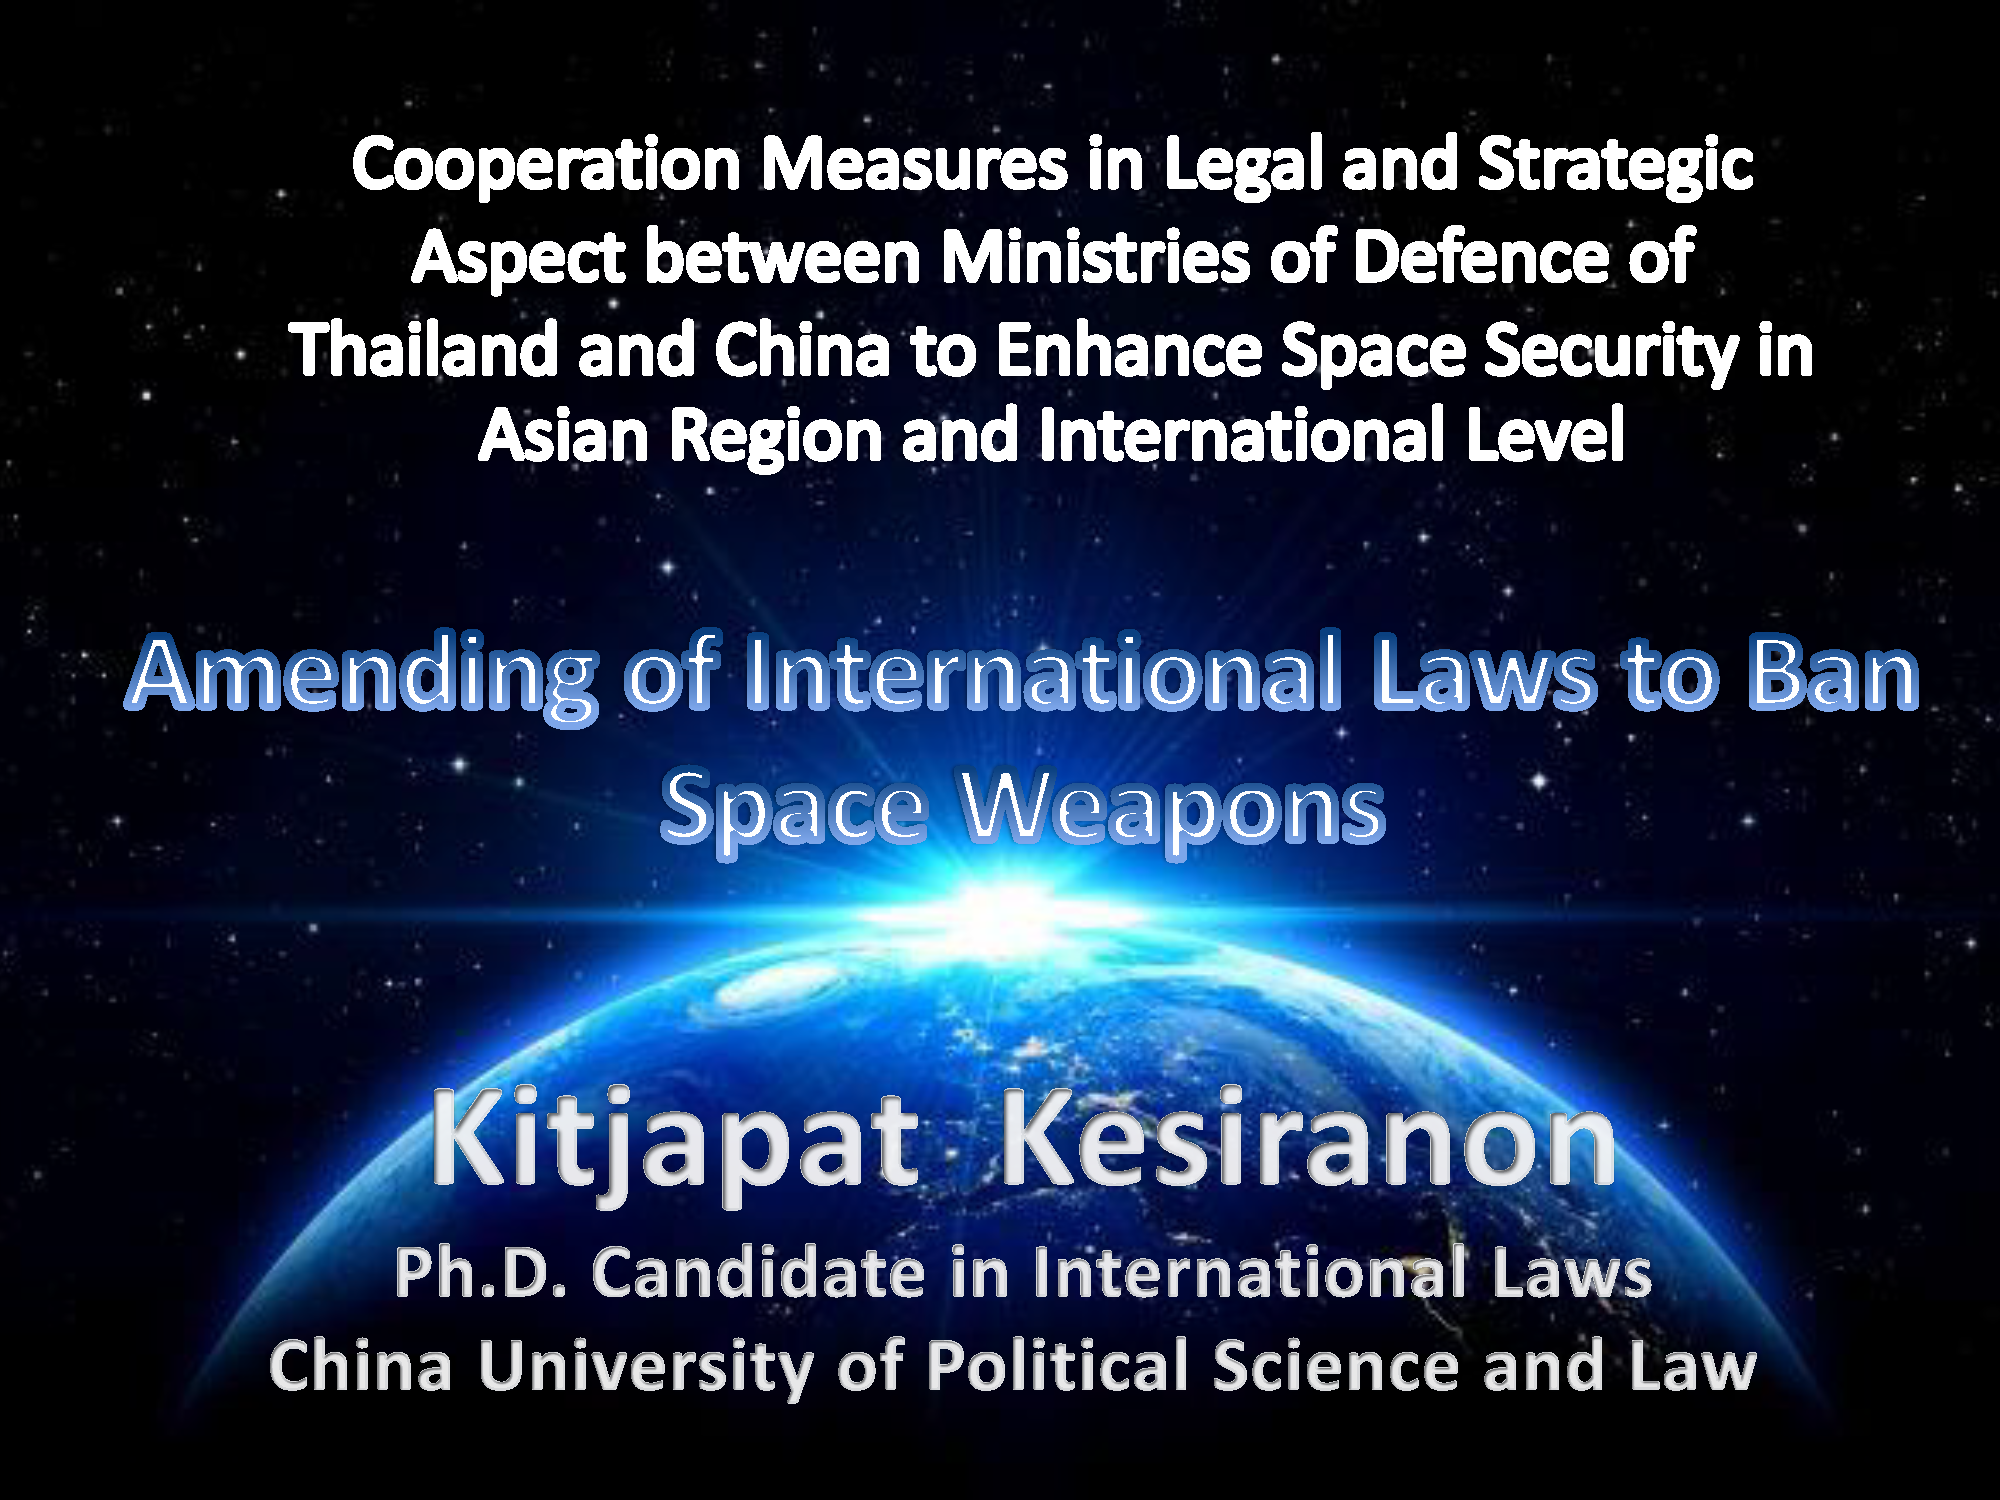 The Eighth Thai-Chinese Strategic Research Seminar, Session 4 Policy Coordination, Diplomacy and Defense Cooperation